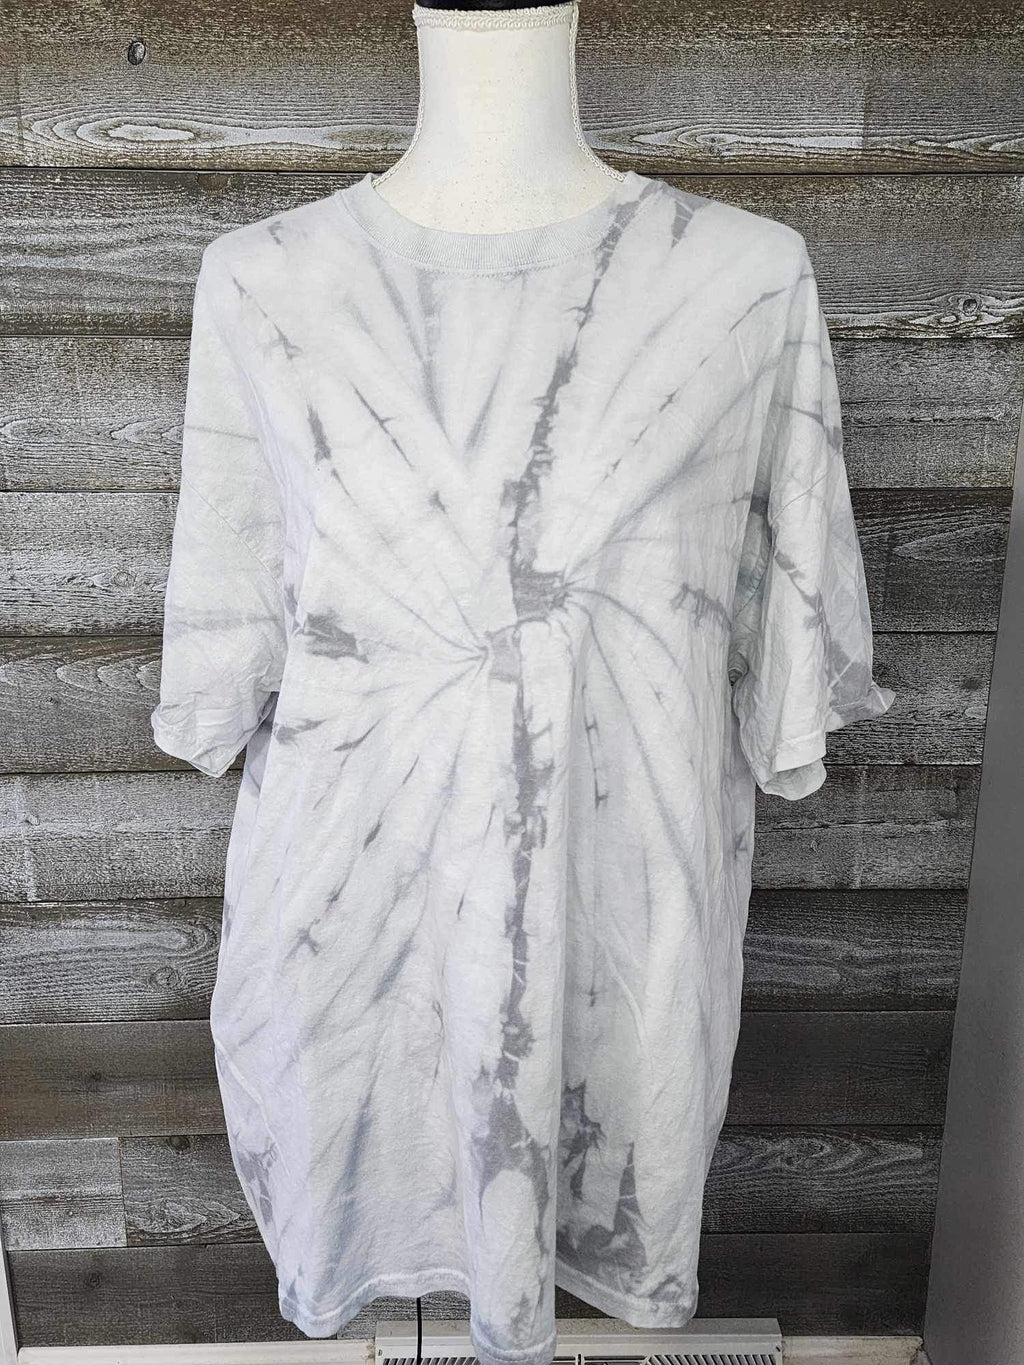 Tie Dye white and grey Tee